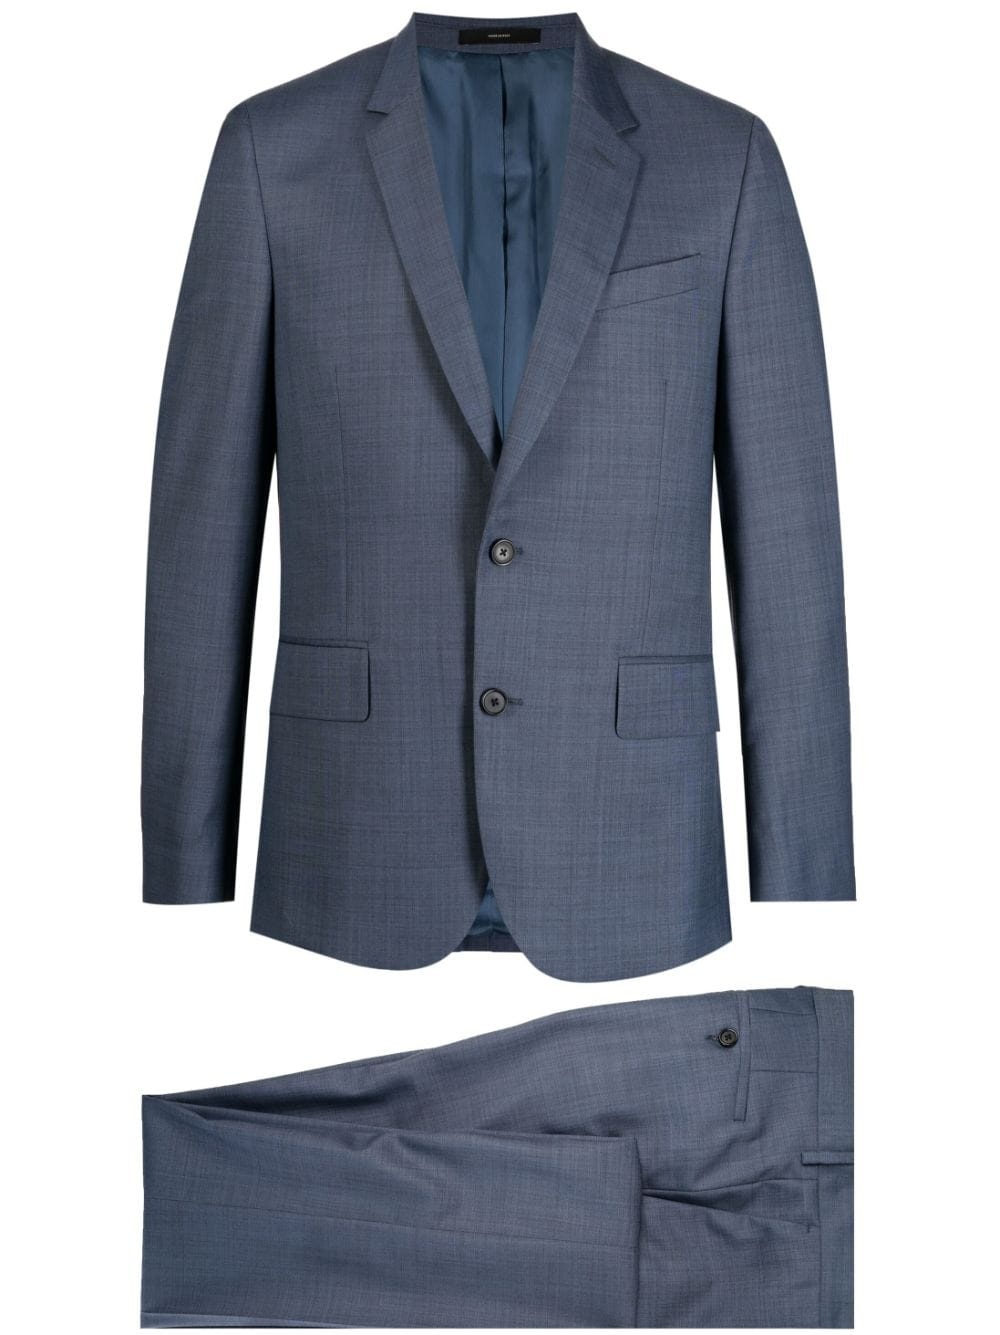 The Soho single-breasted suit - 1